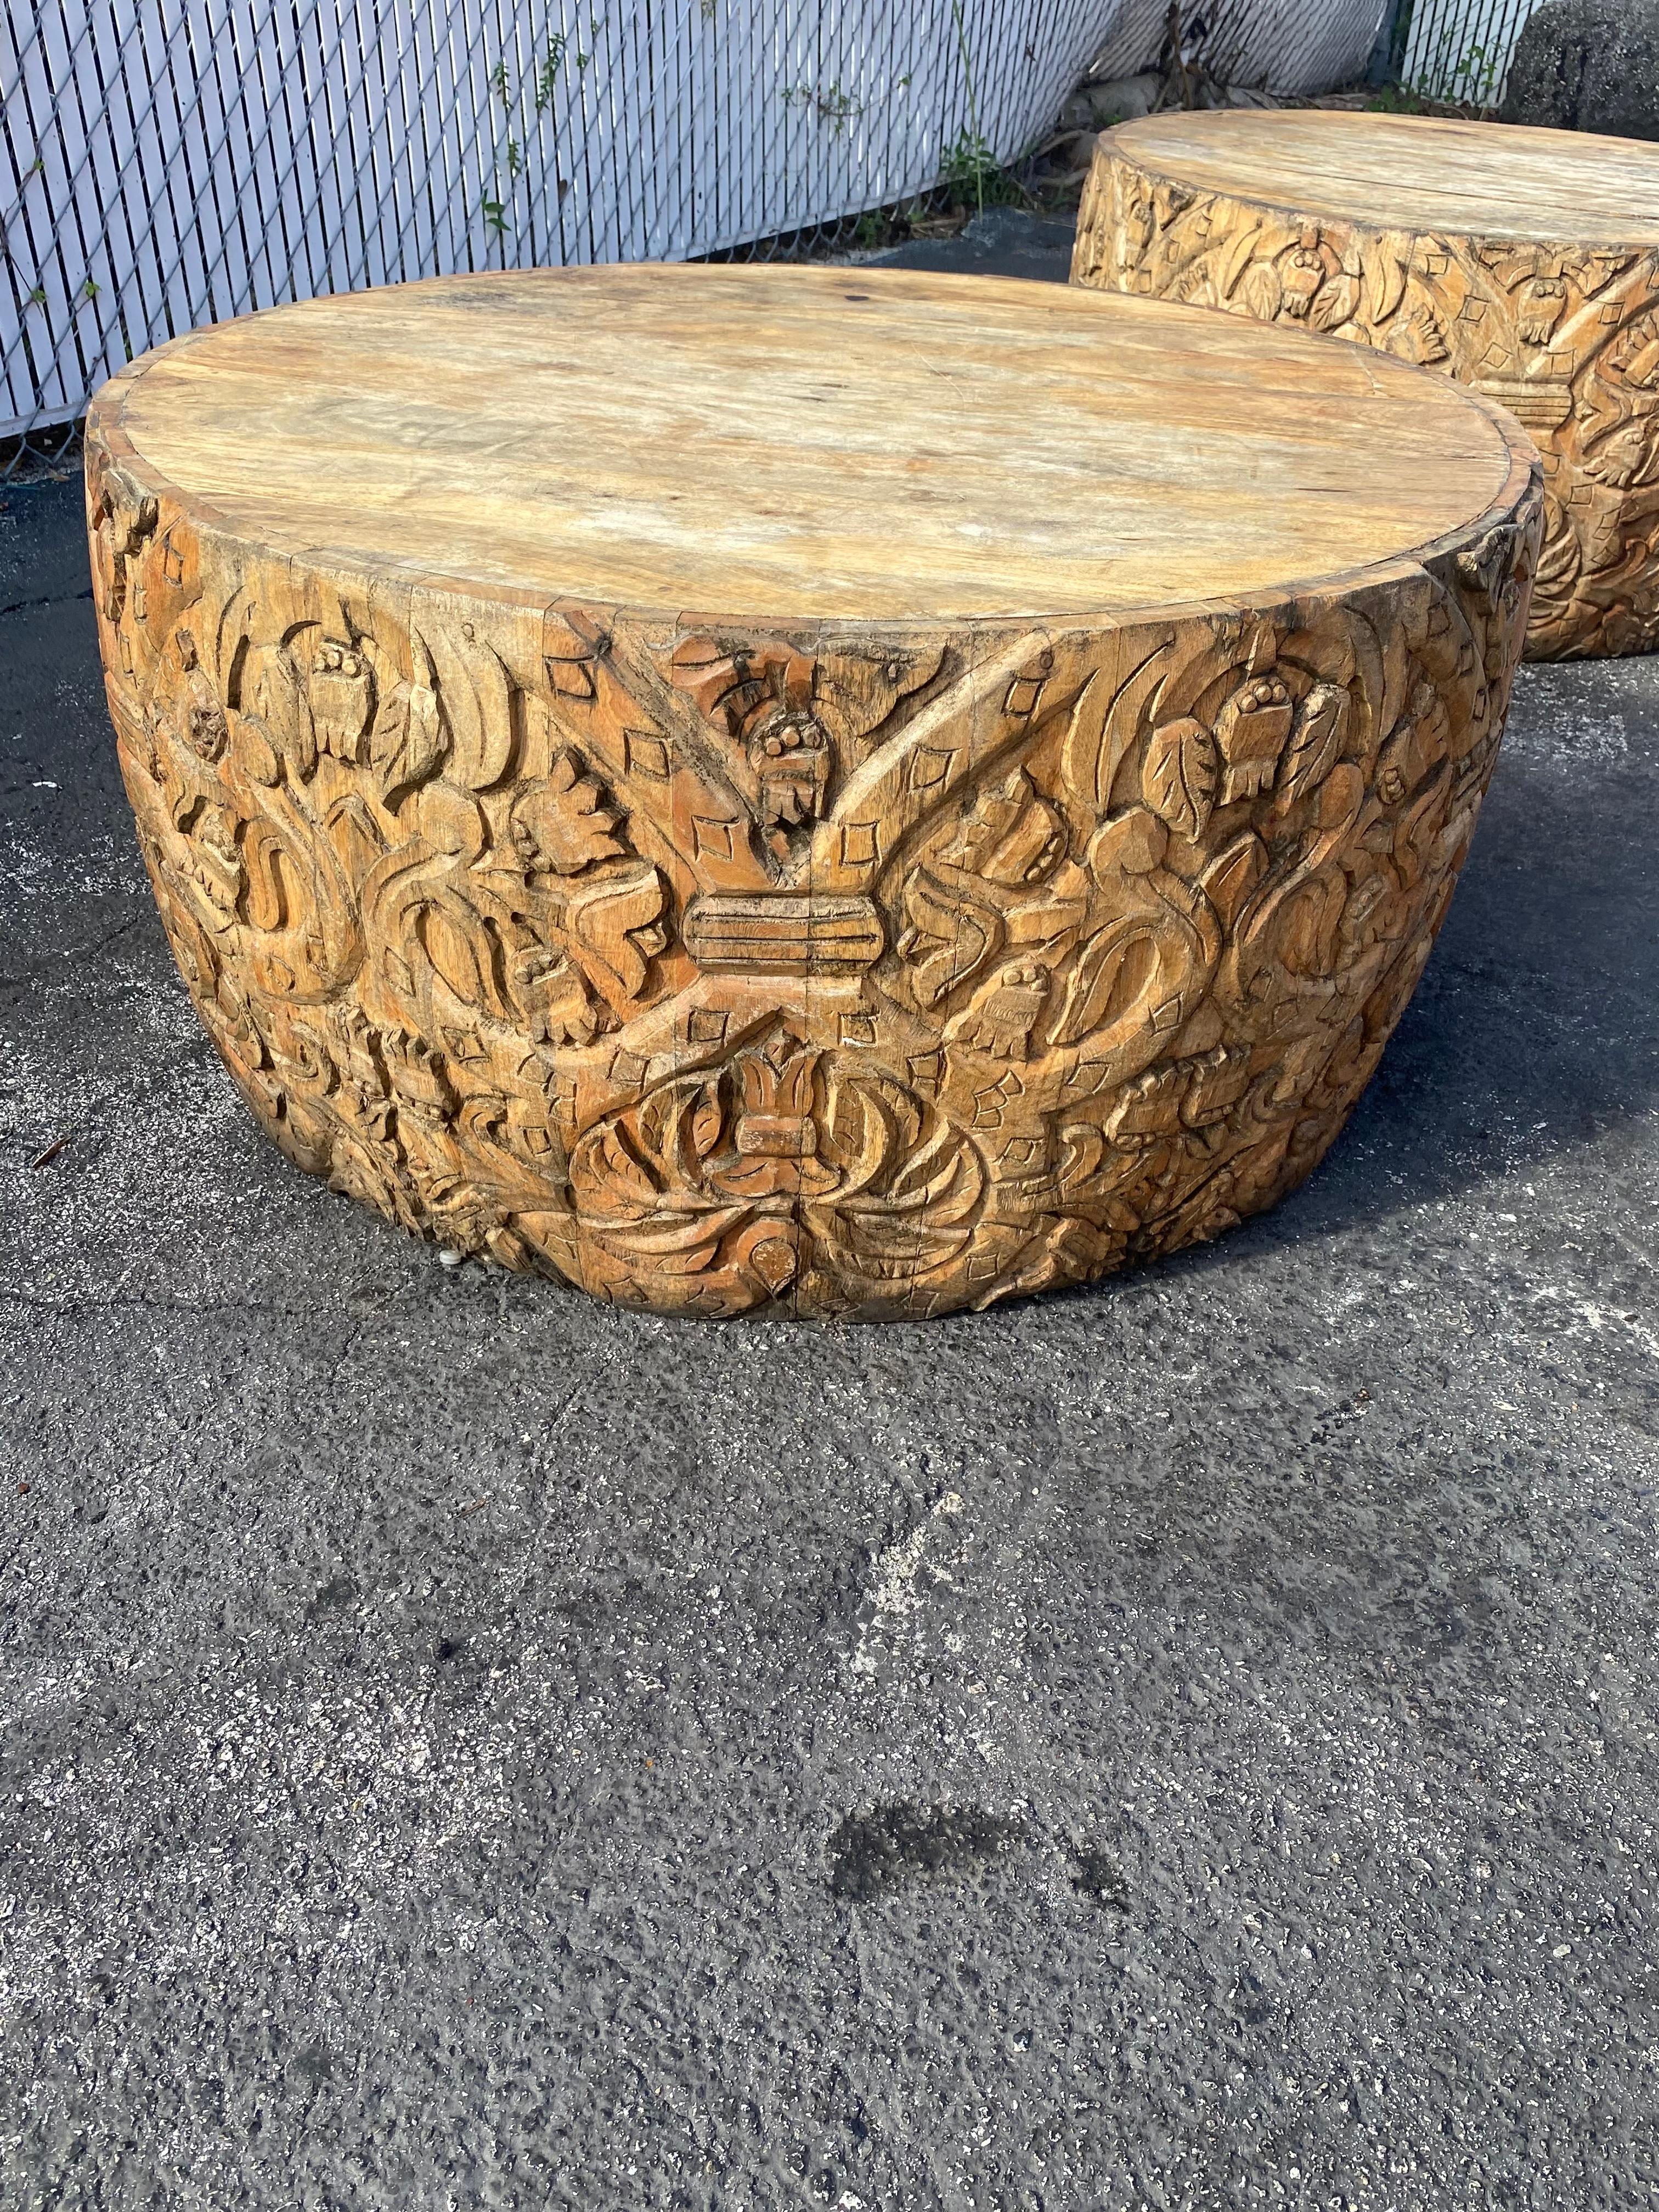 1940s Heavily Carved Teak Gilt Wood Round Drum Coffee Tables, Set of 2 For Sale 3